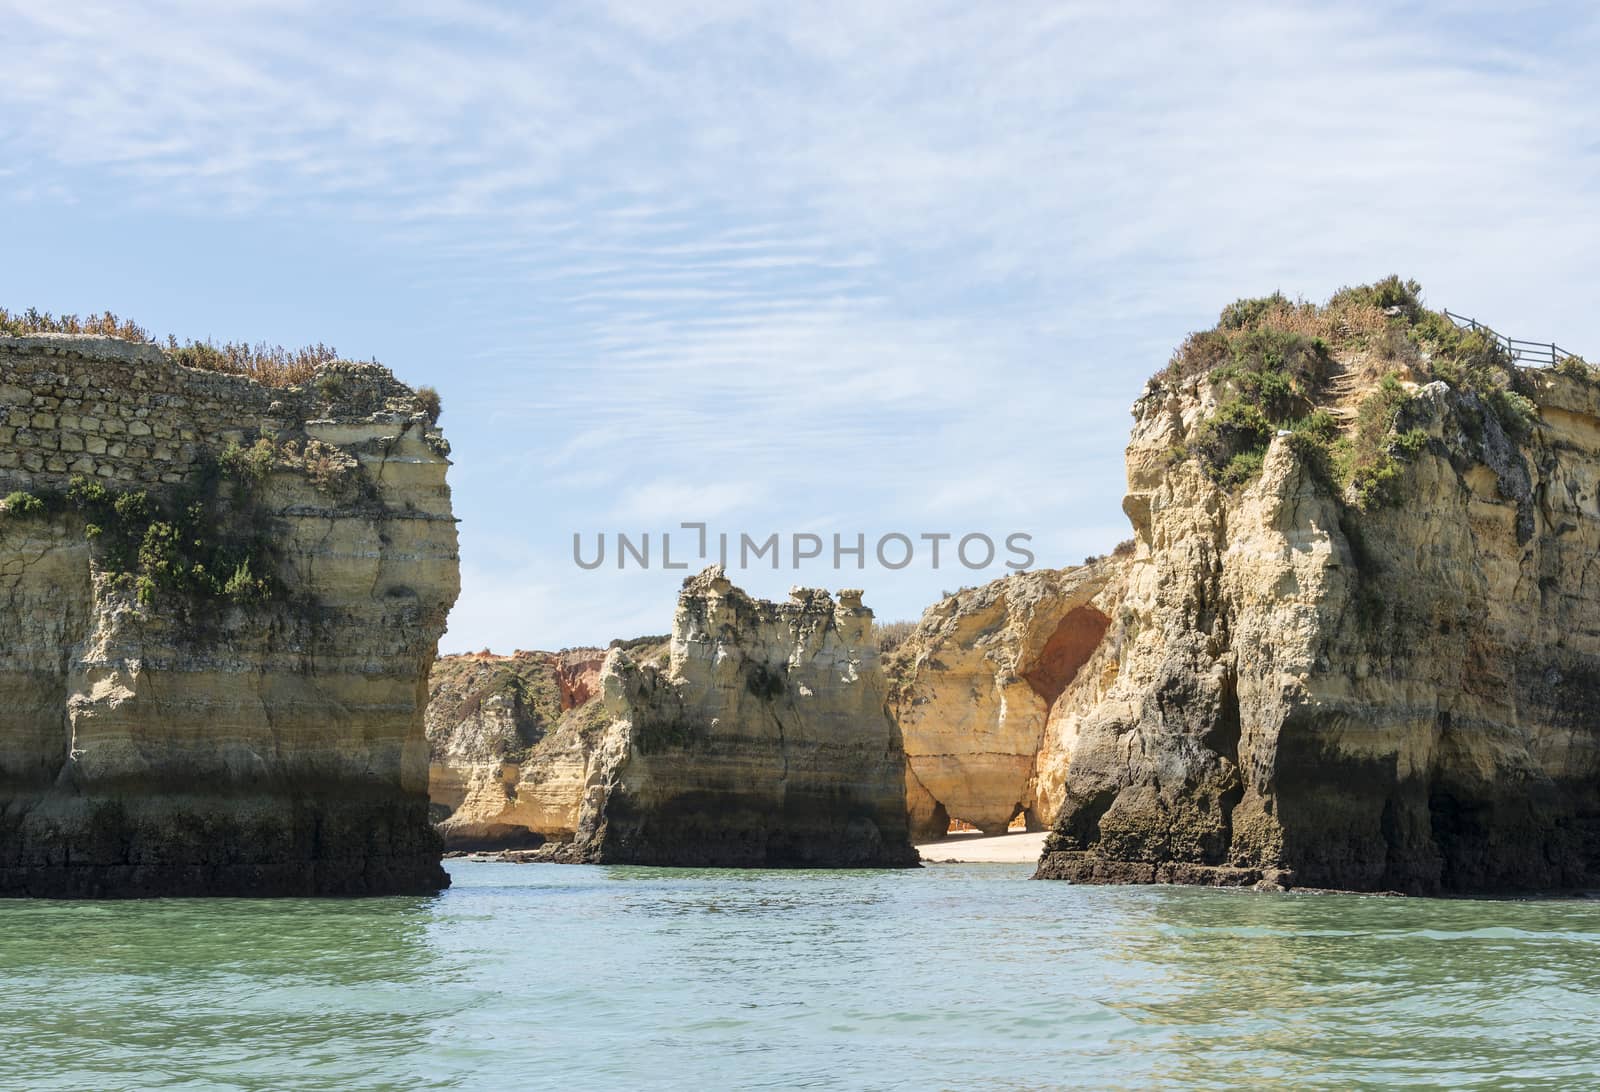 rocks and cliff in algarve city lagos in Portugal, the most beautifull coastline of the world, seen from a boat